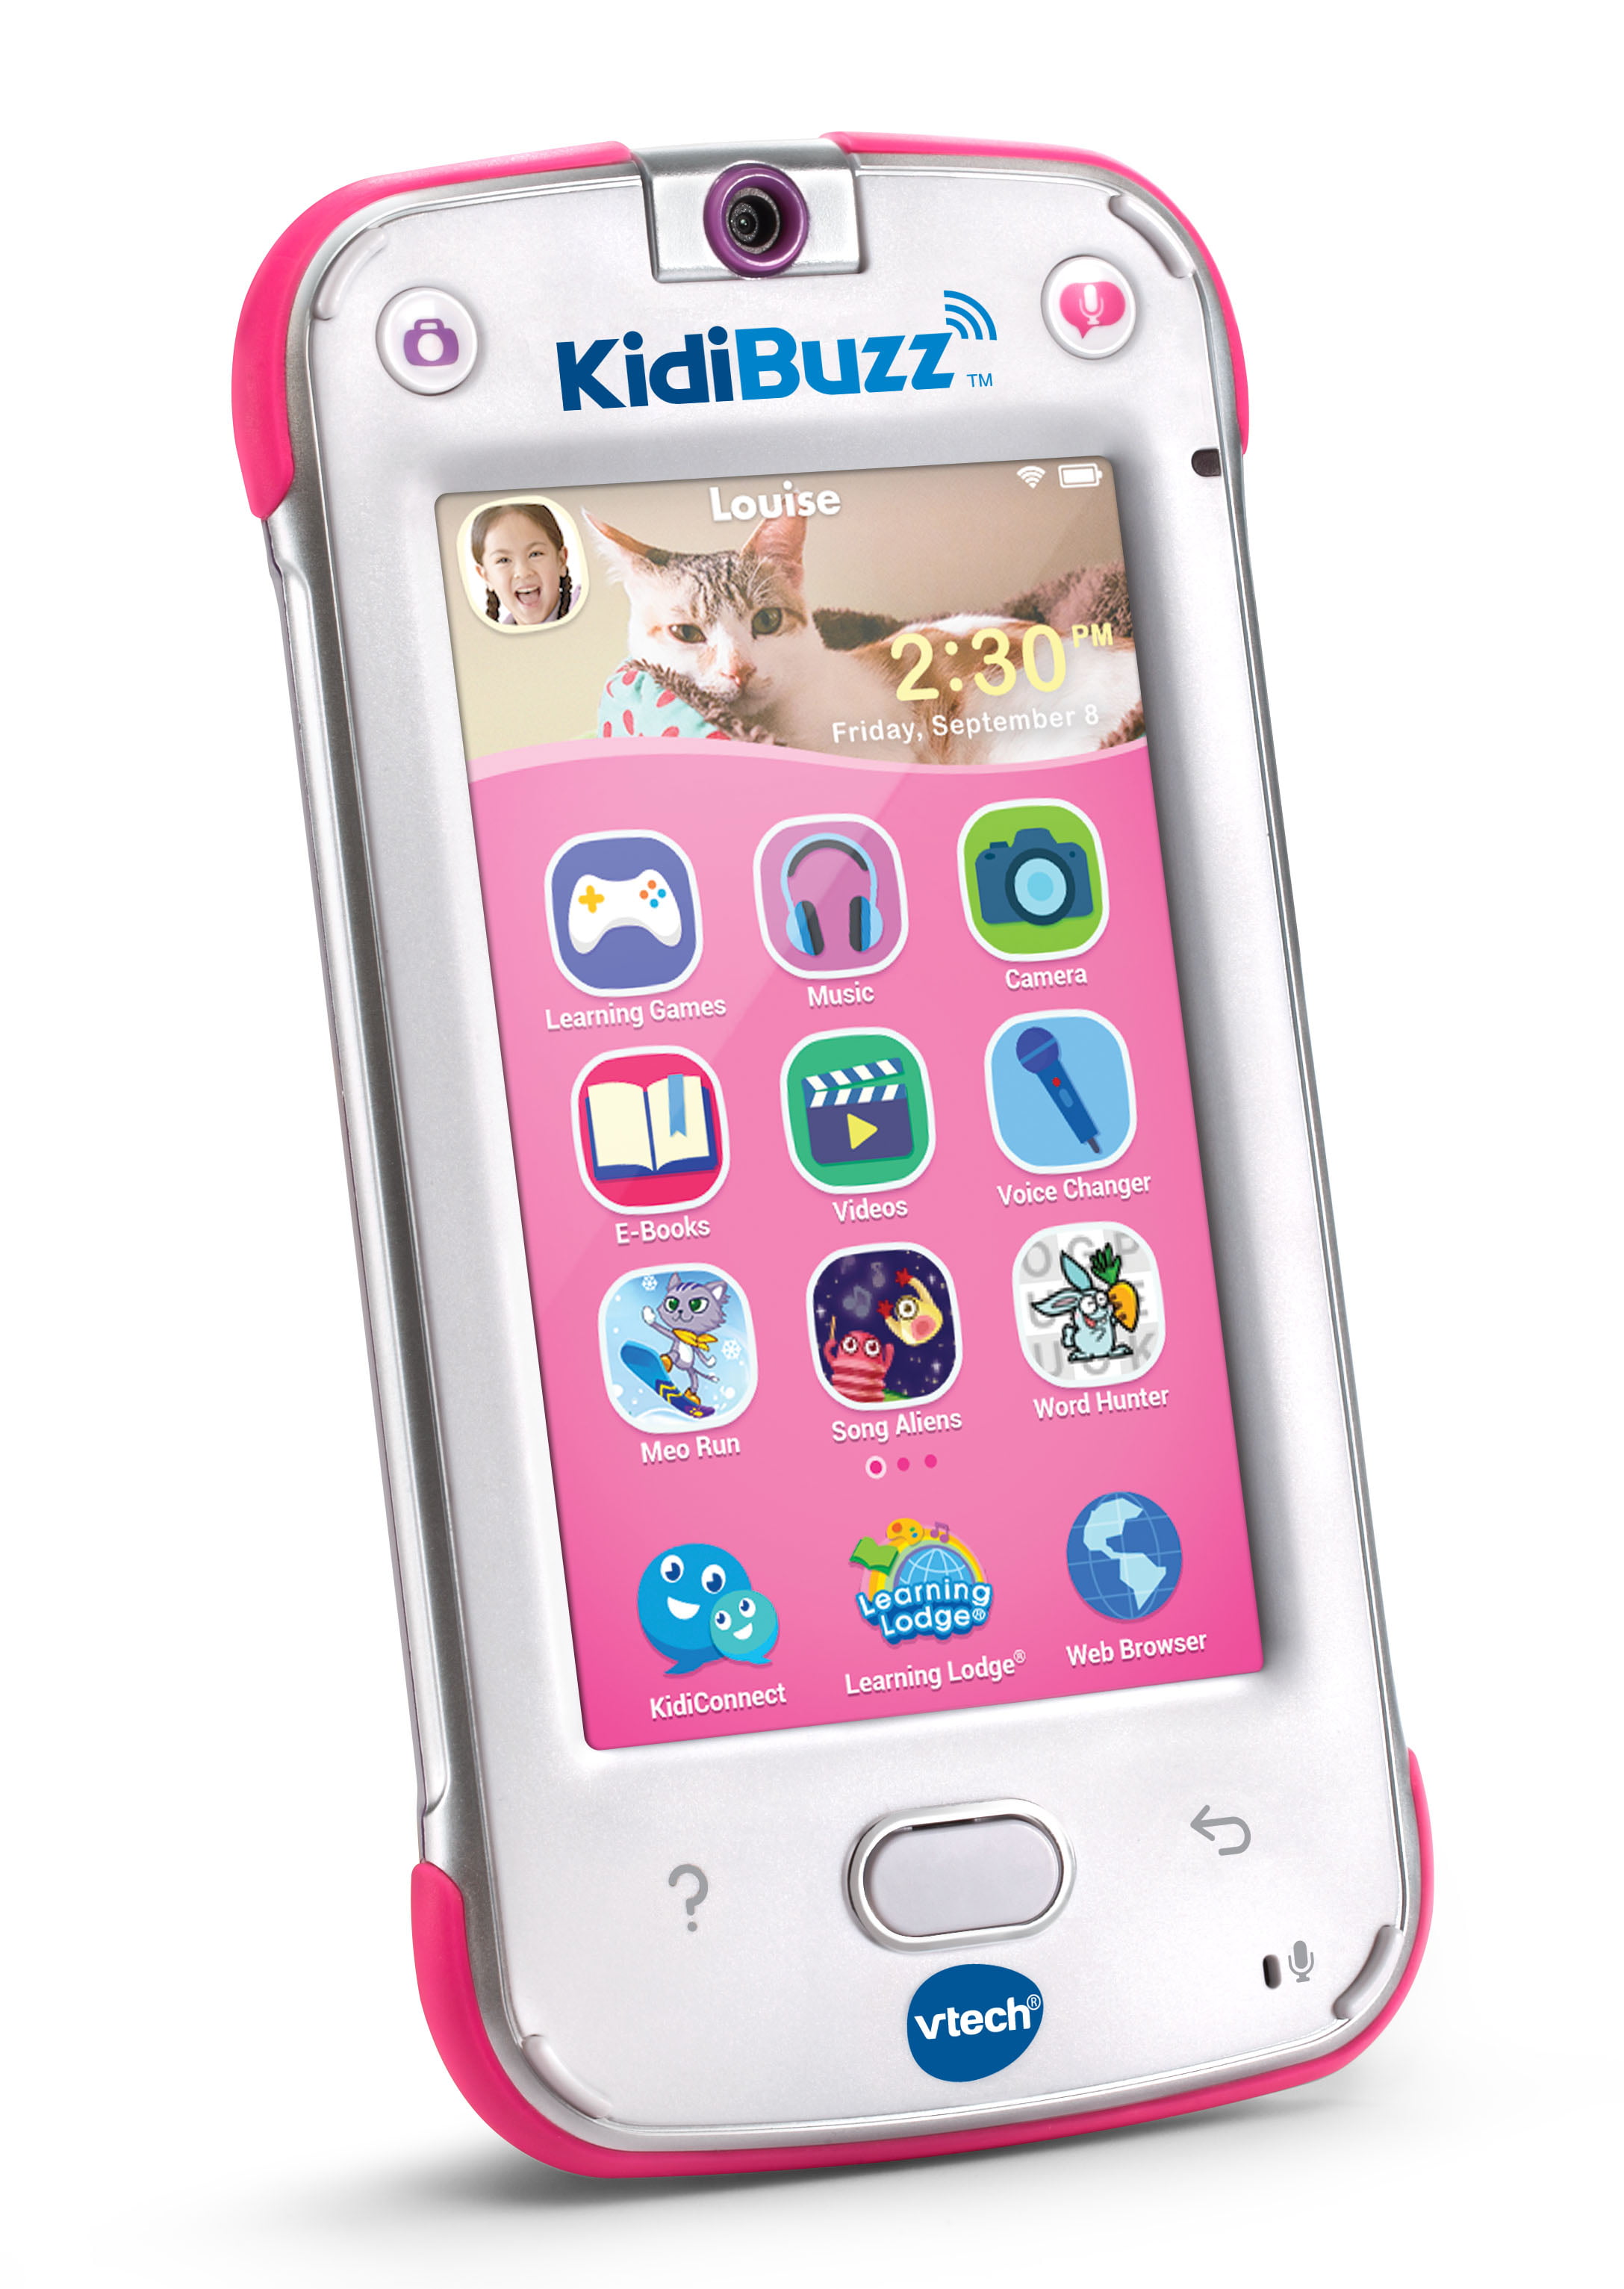 New Factory Sealed VTech KidiBuzz Hand-Held Smart Device Toy Phone For Kids 